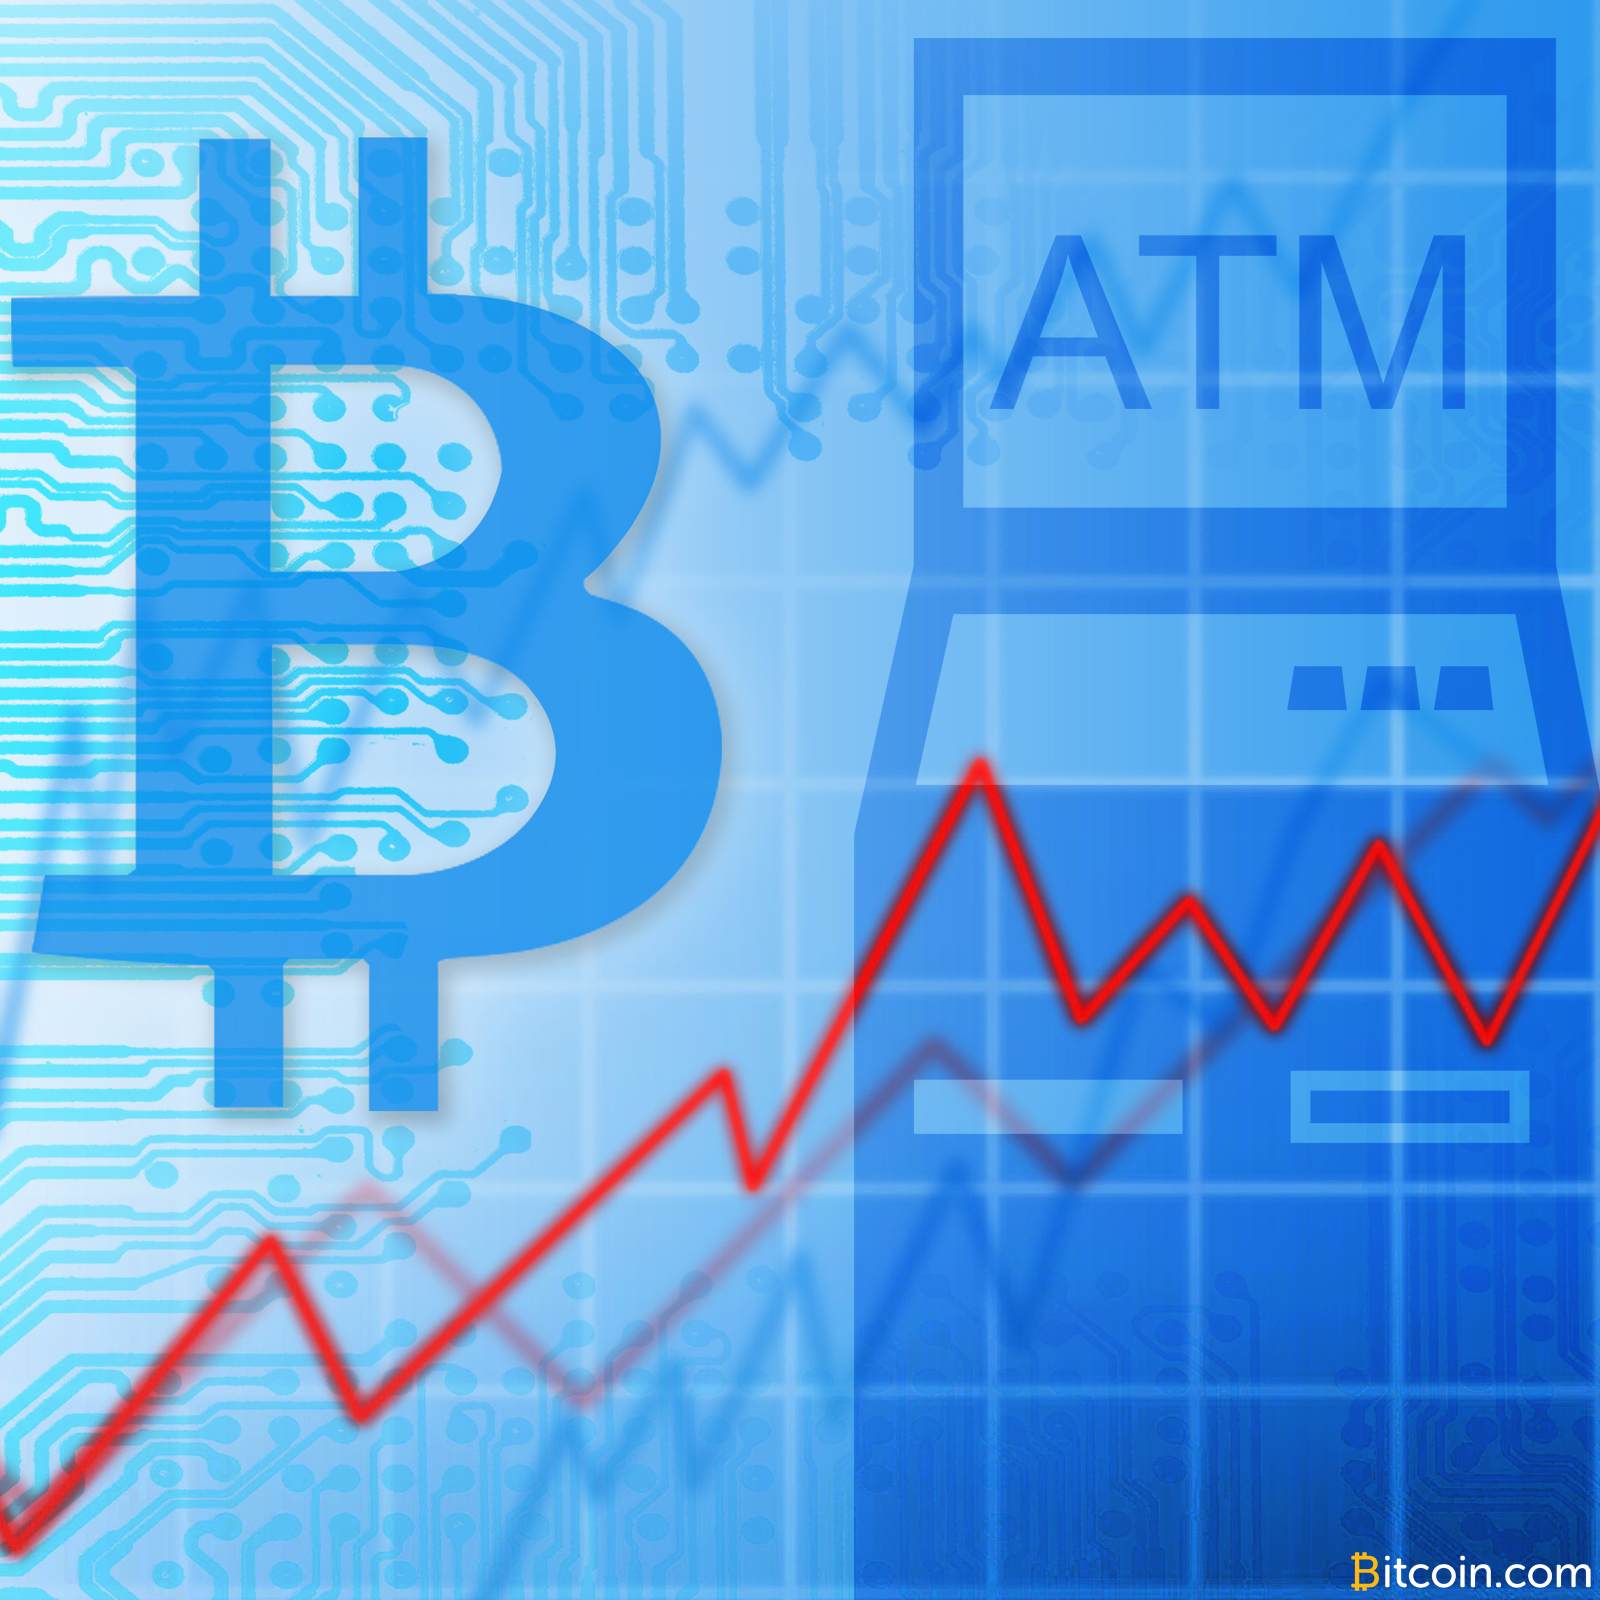 Austria, Canada, and US See Growth in Number of Bitcoin ATMs